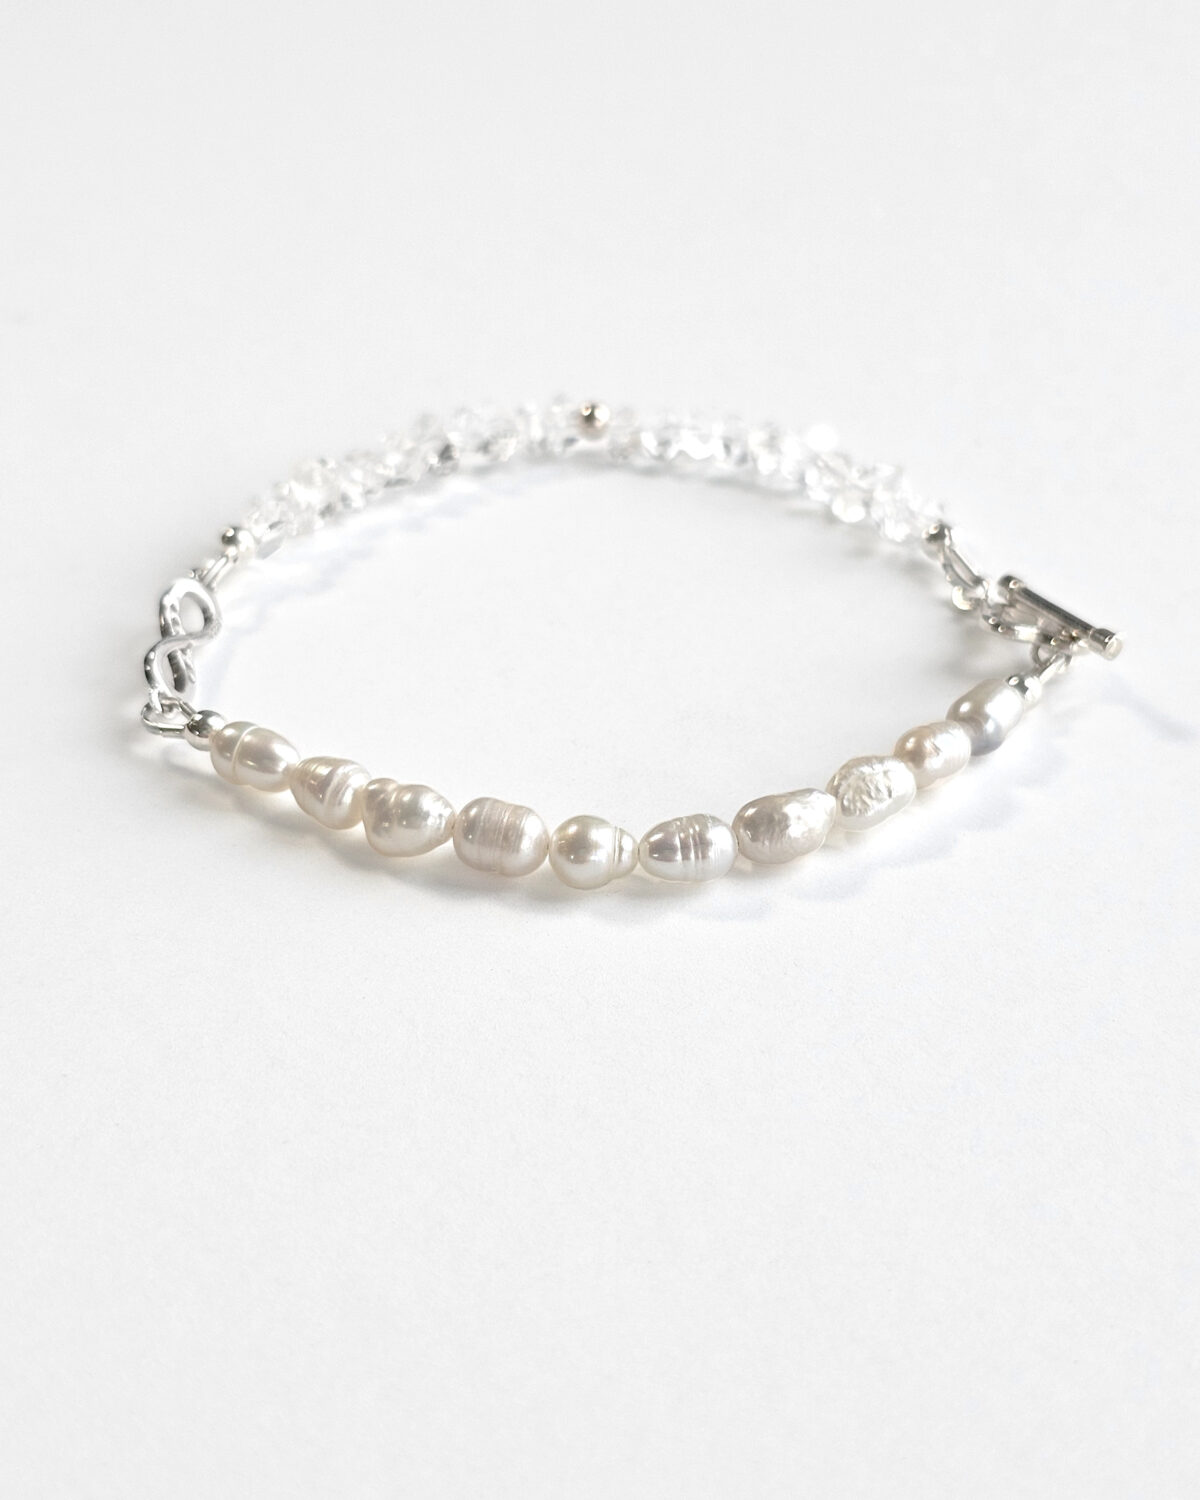 baroque pearls and herkimer diamonds bracelet with sterling silver infinite and four leaves toggle clasp